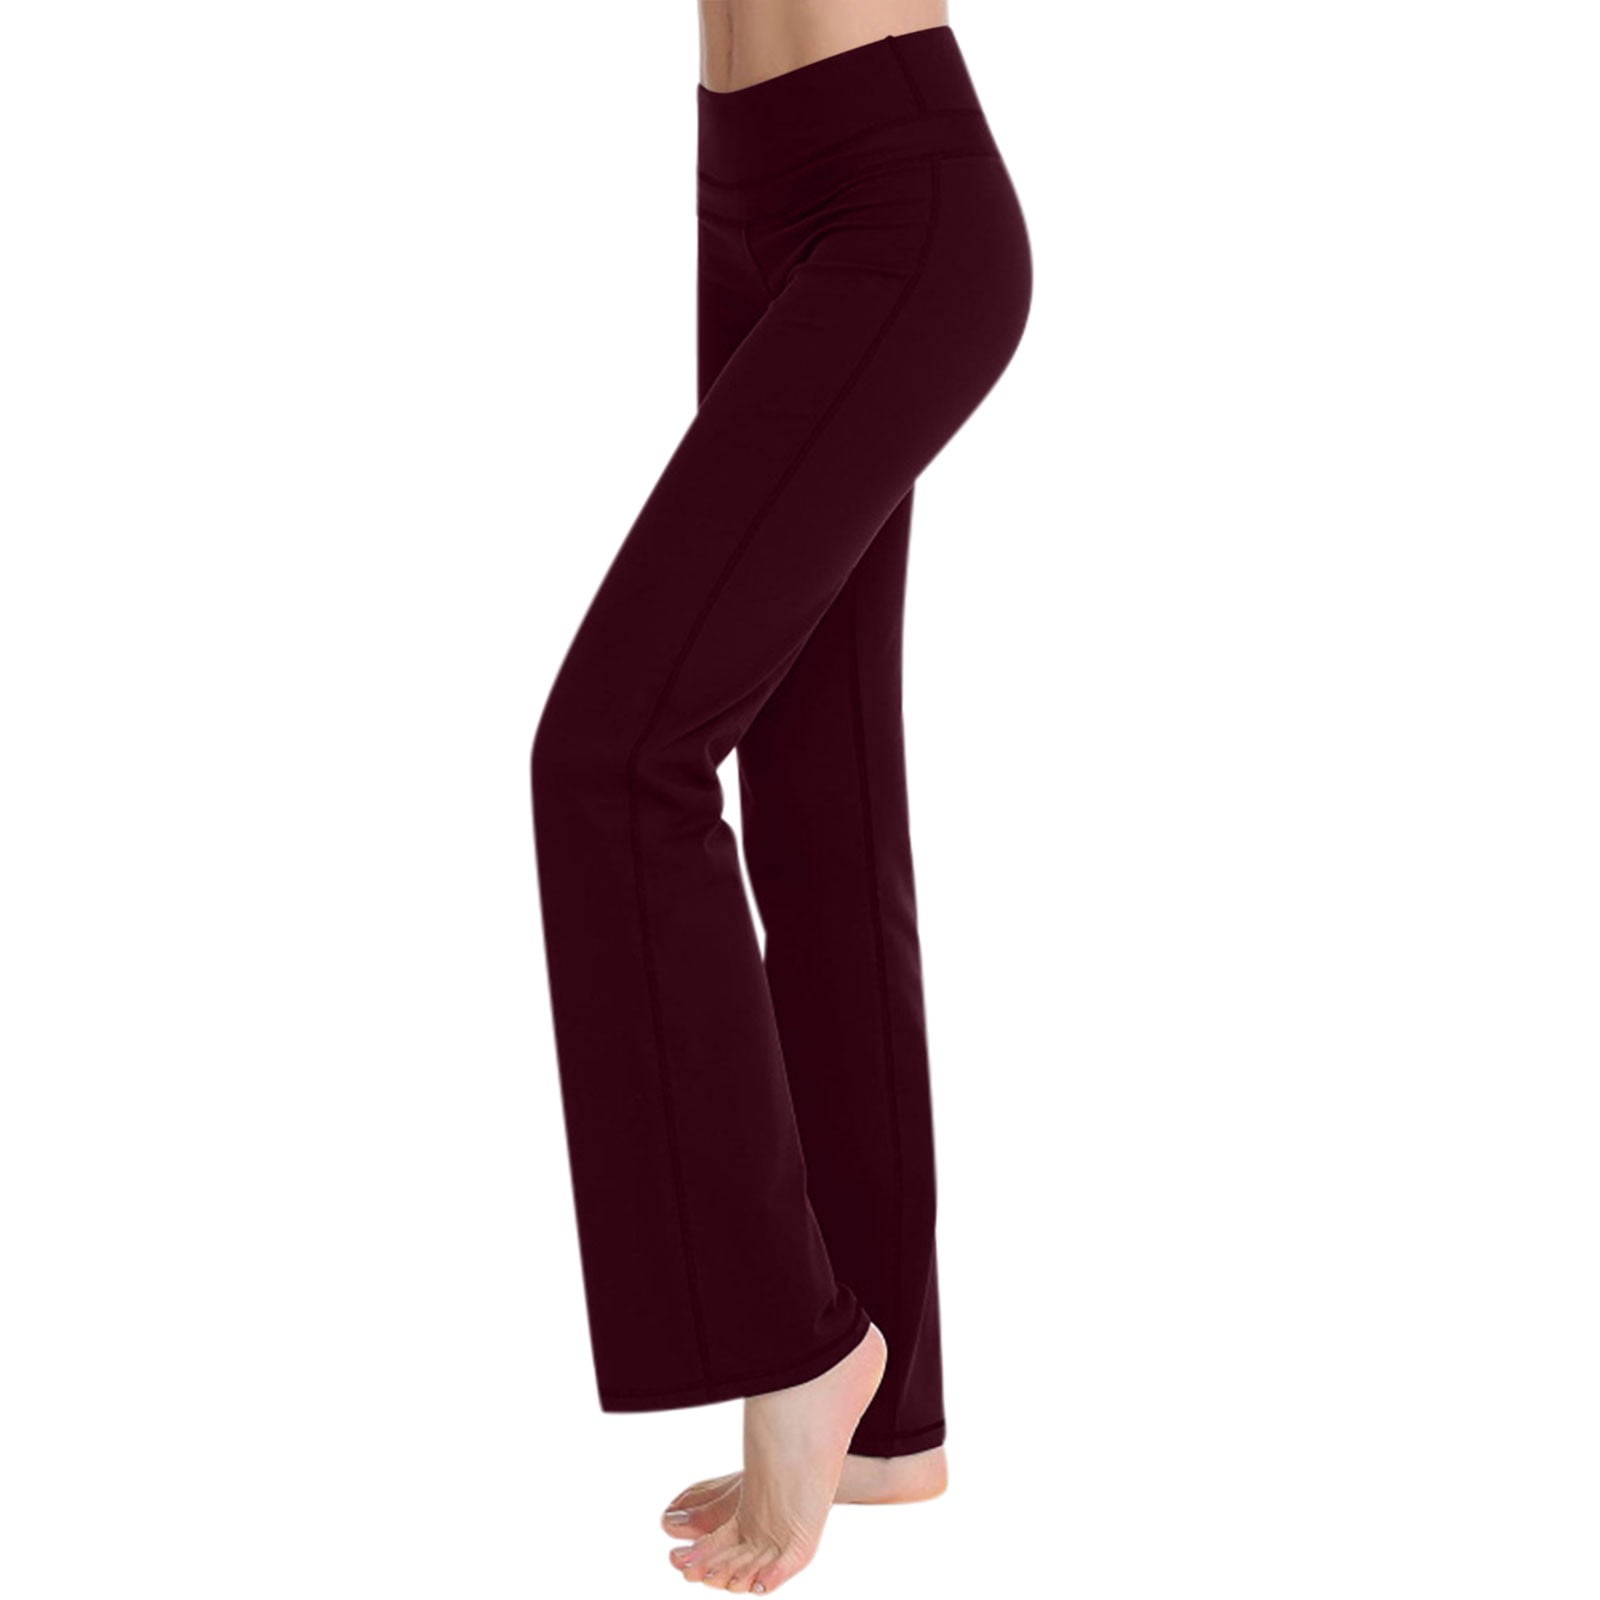 DeHolifer Yoga Pants With Pockets For Women, Women's Loose High Waist ...